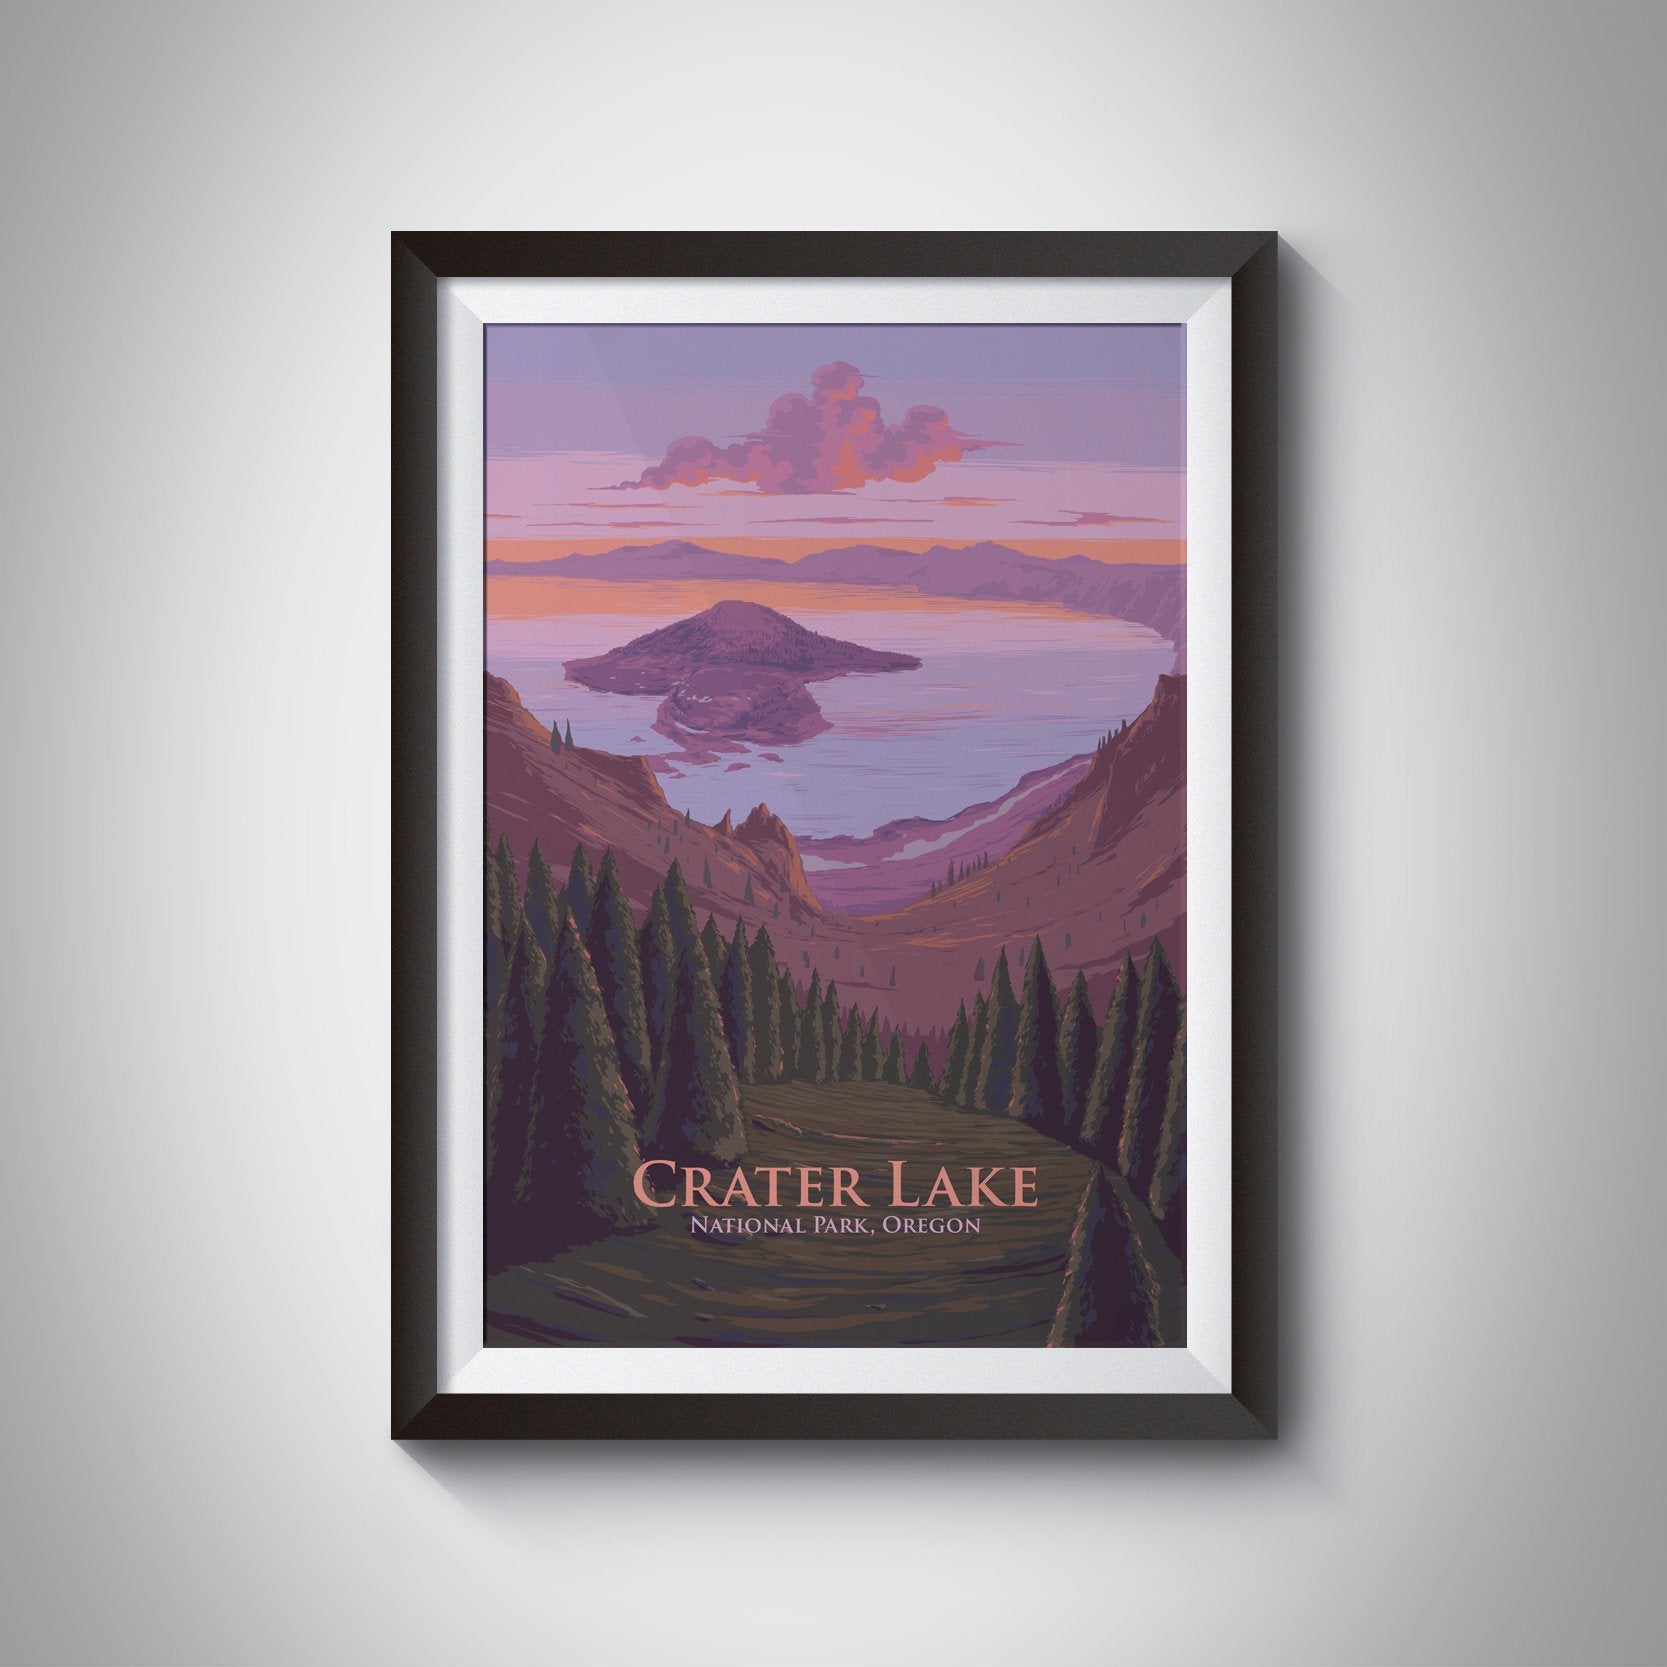 Crater Lake National Park Travel Poster